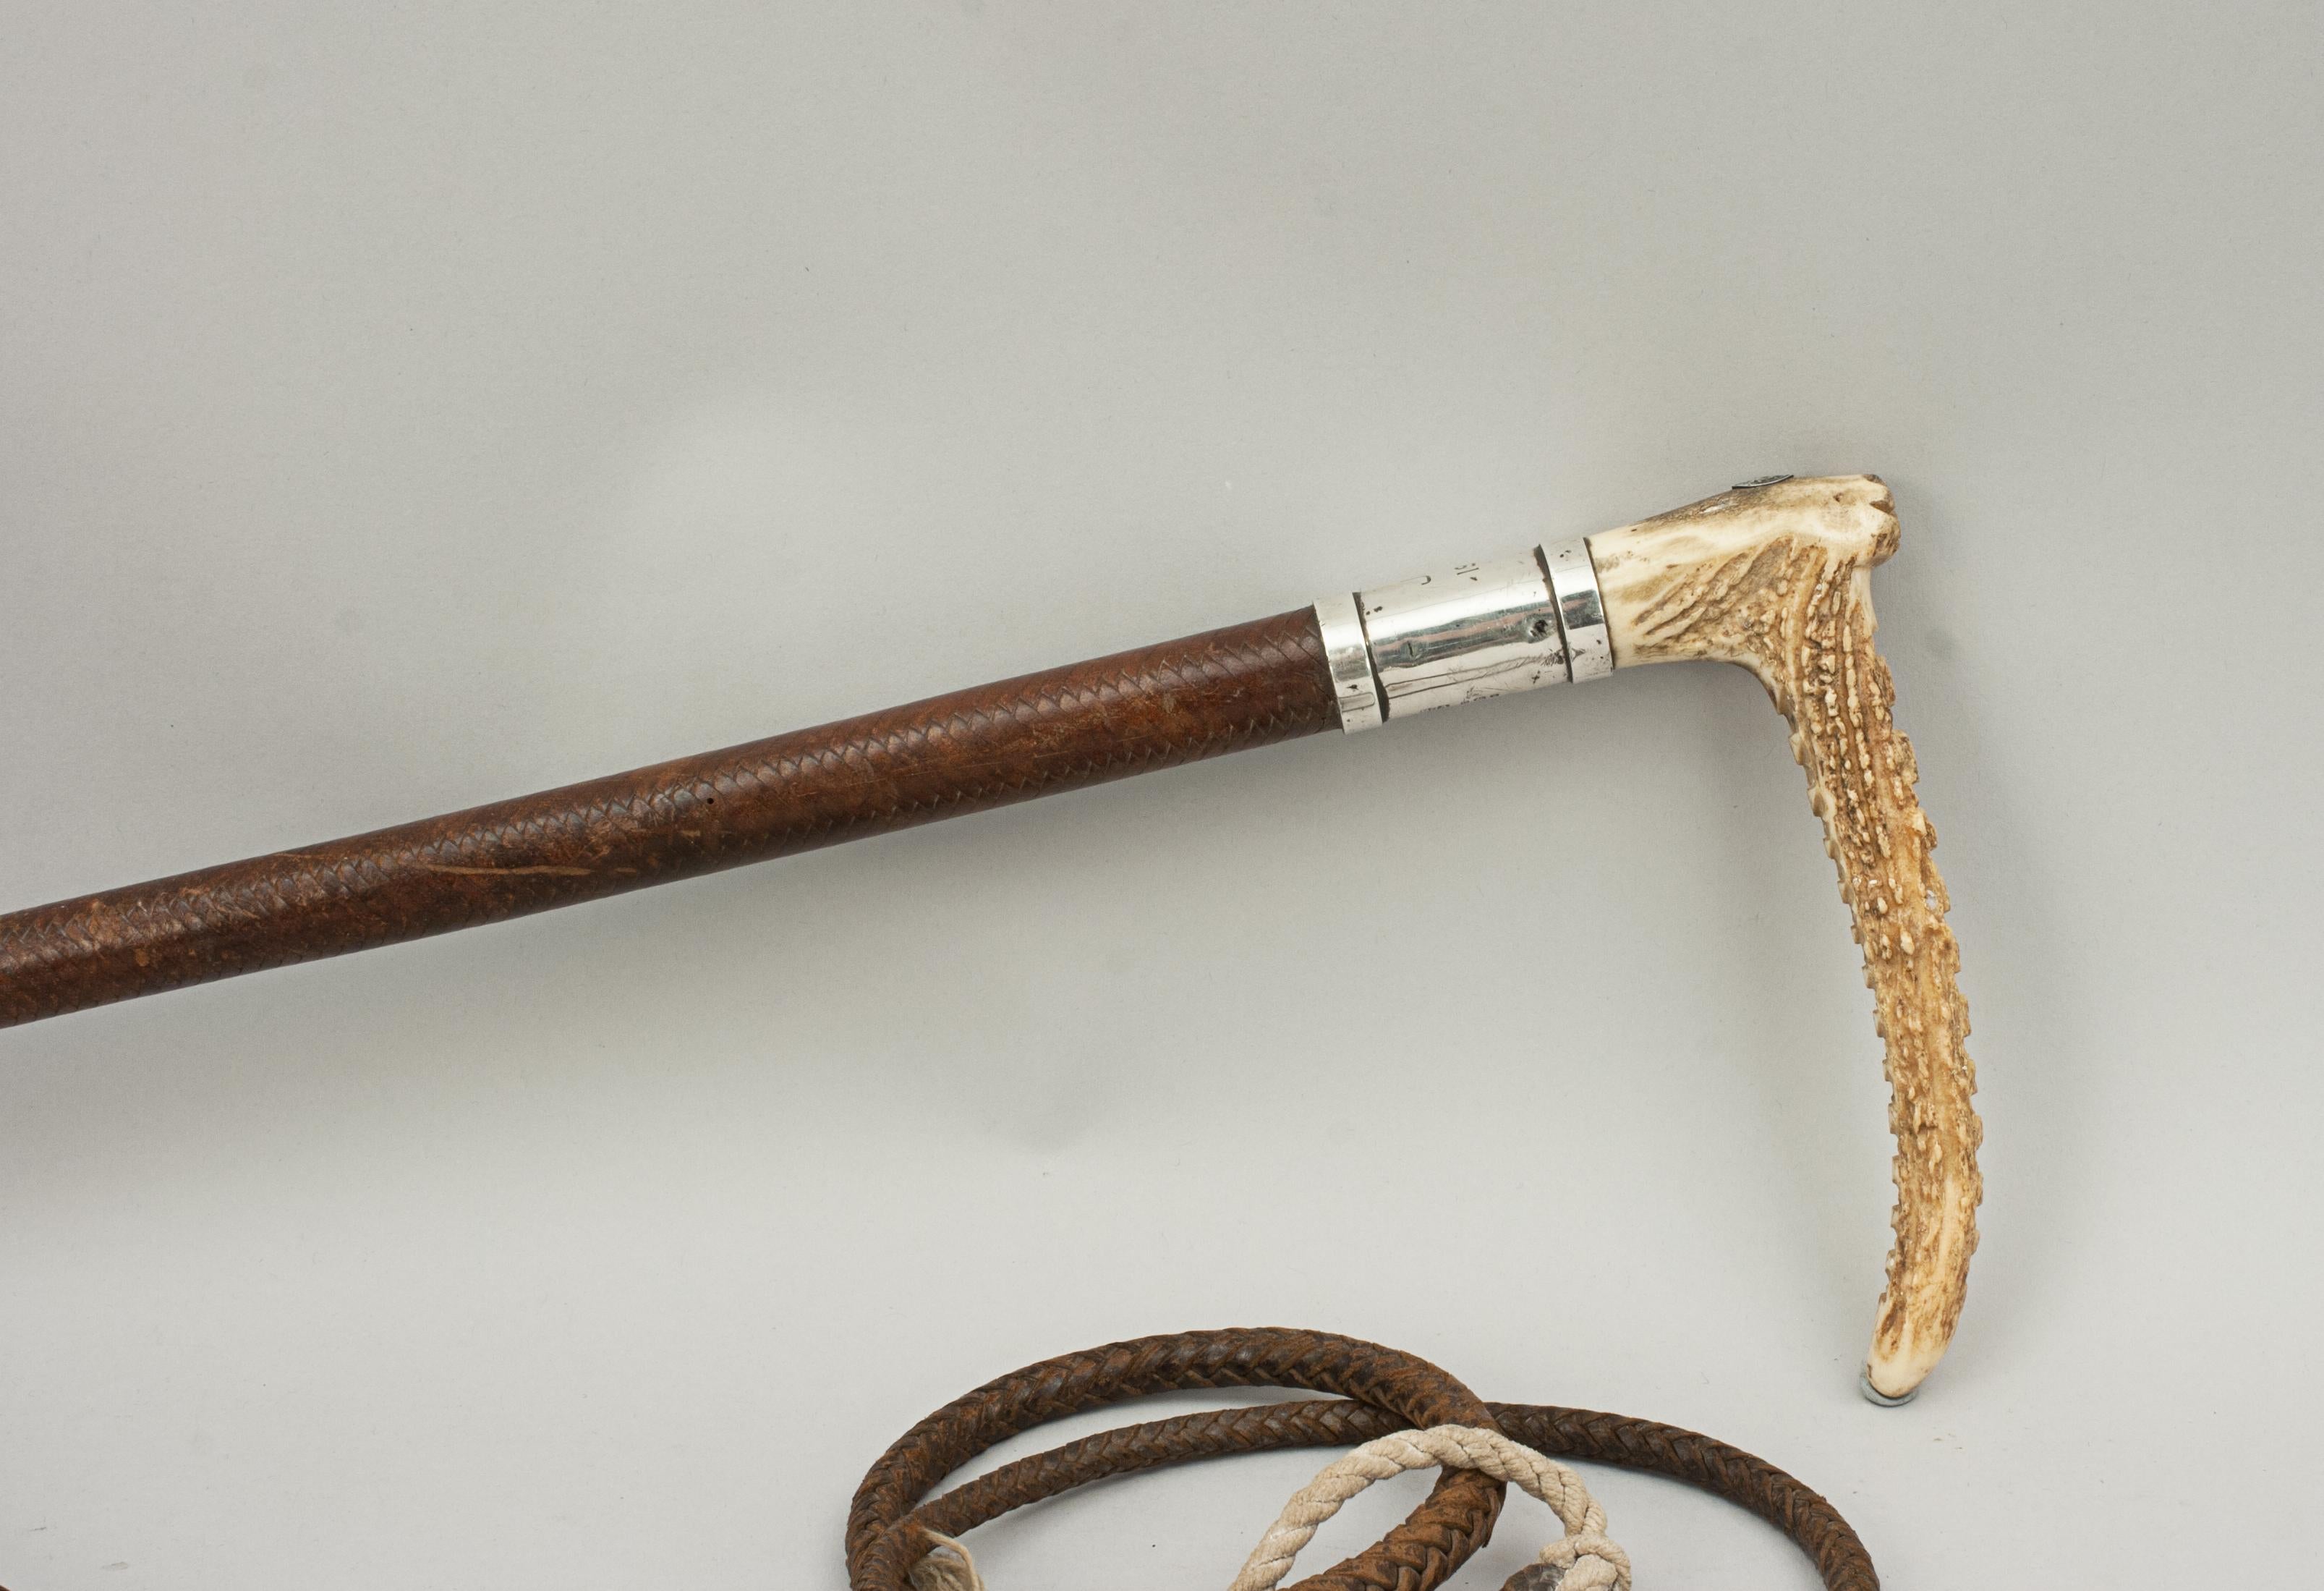 Vintage swaine hunting riding whip, riding crop, antler handle.
An old stag horn handled riding crop made by Swaine. The hunting crop shaft is covered with braided leather and has a silver collar marked 'SWAINE', hallmarked 'London, 1939', engraved